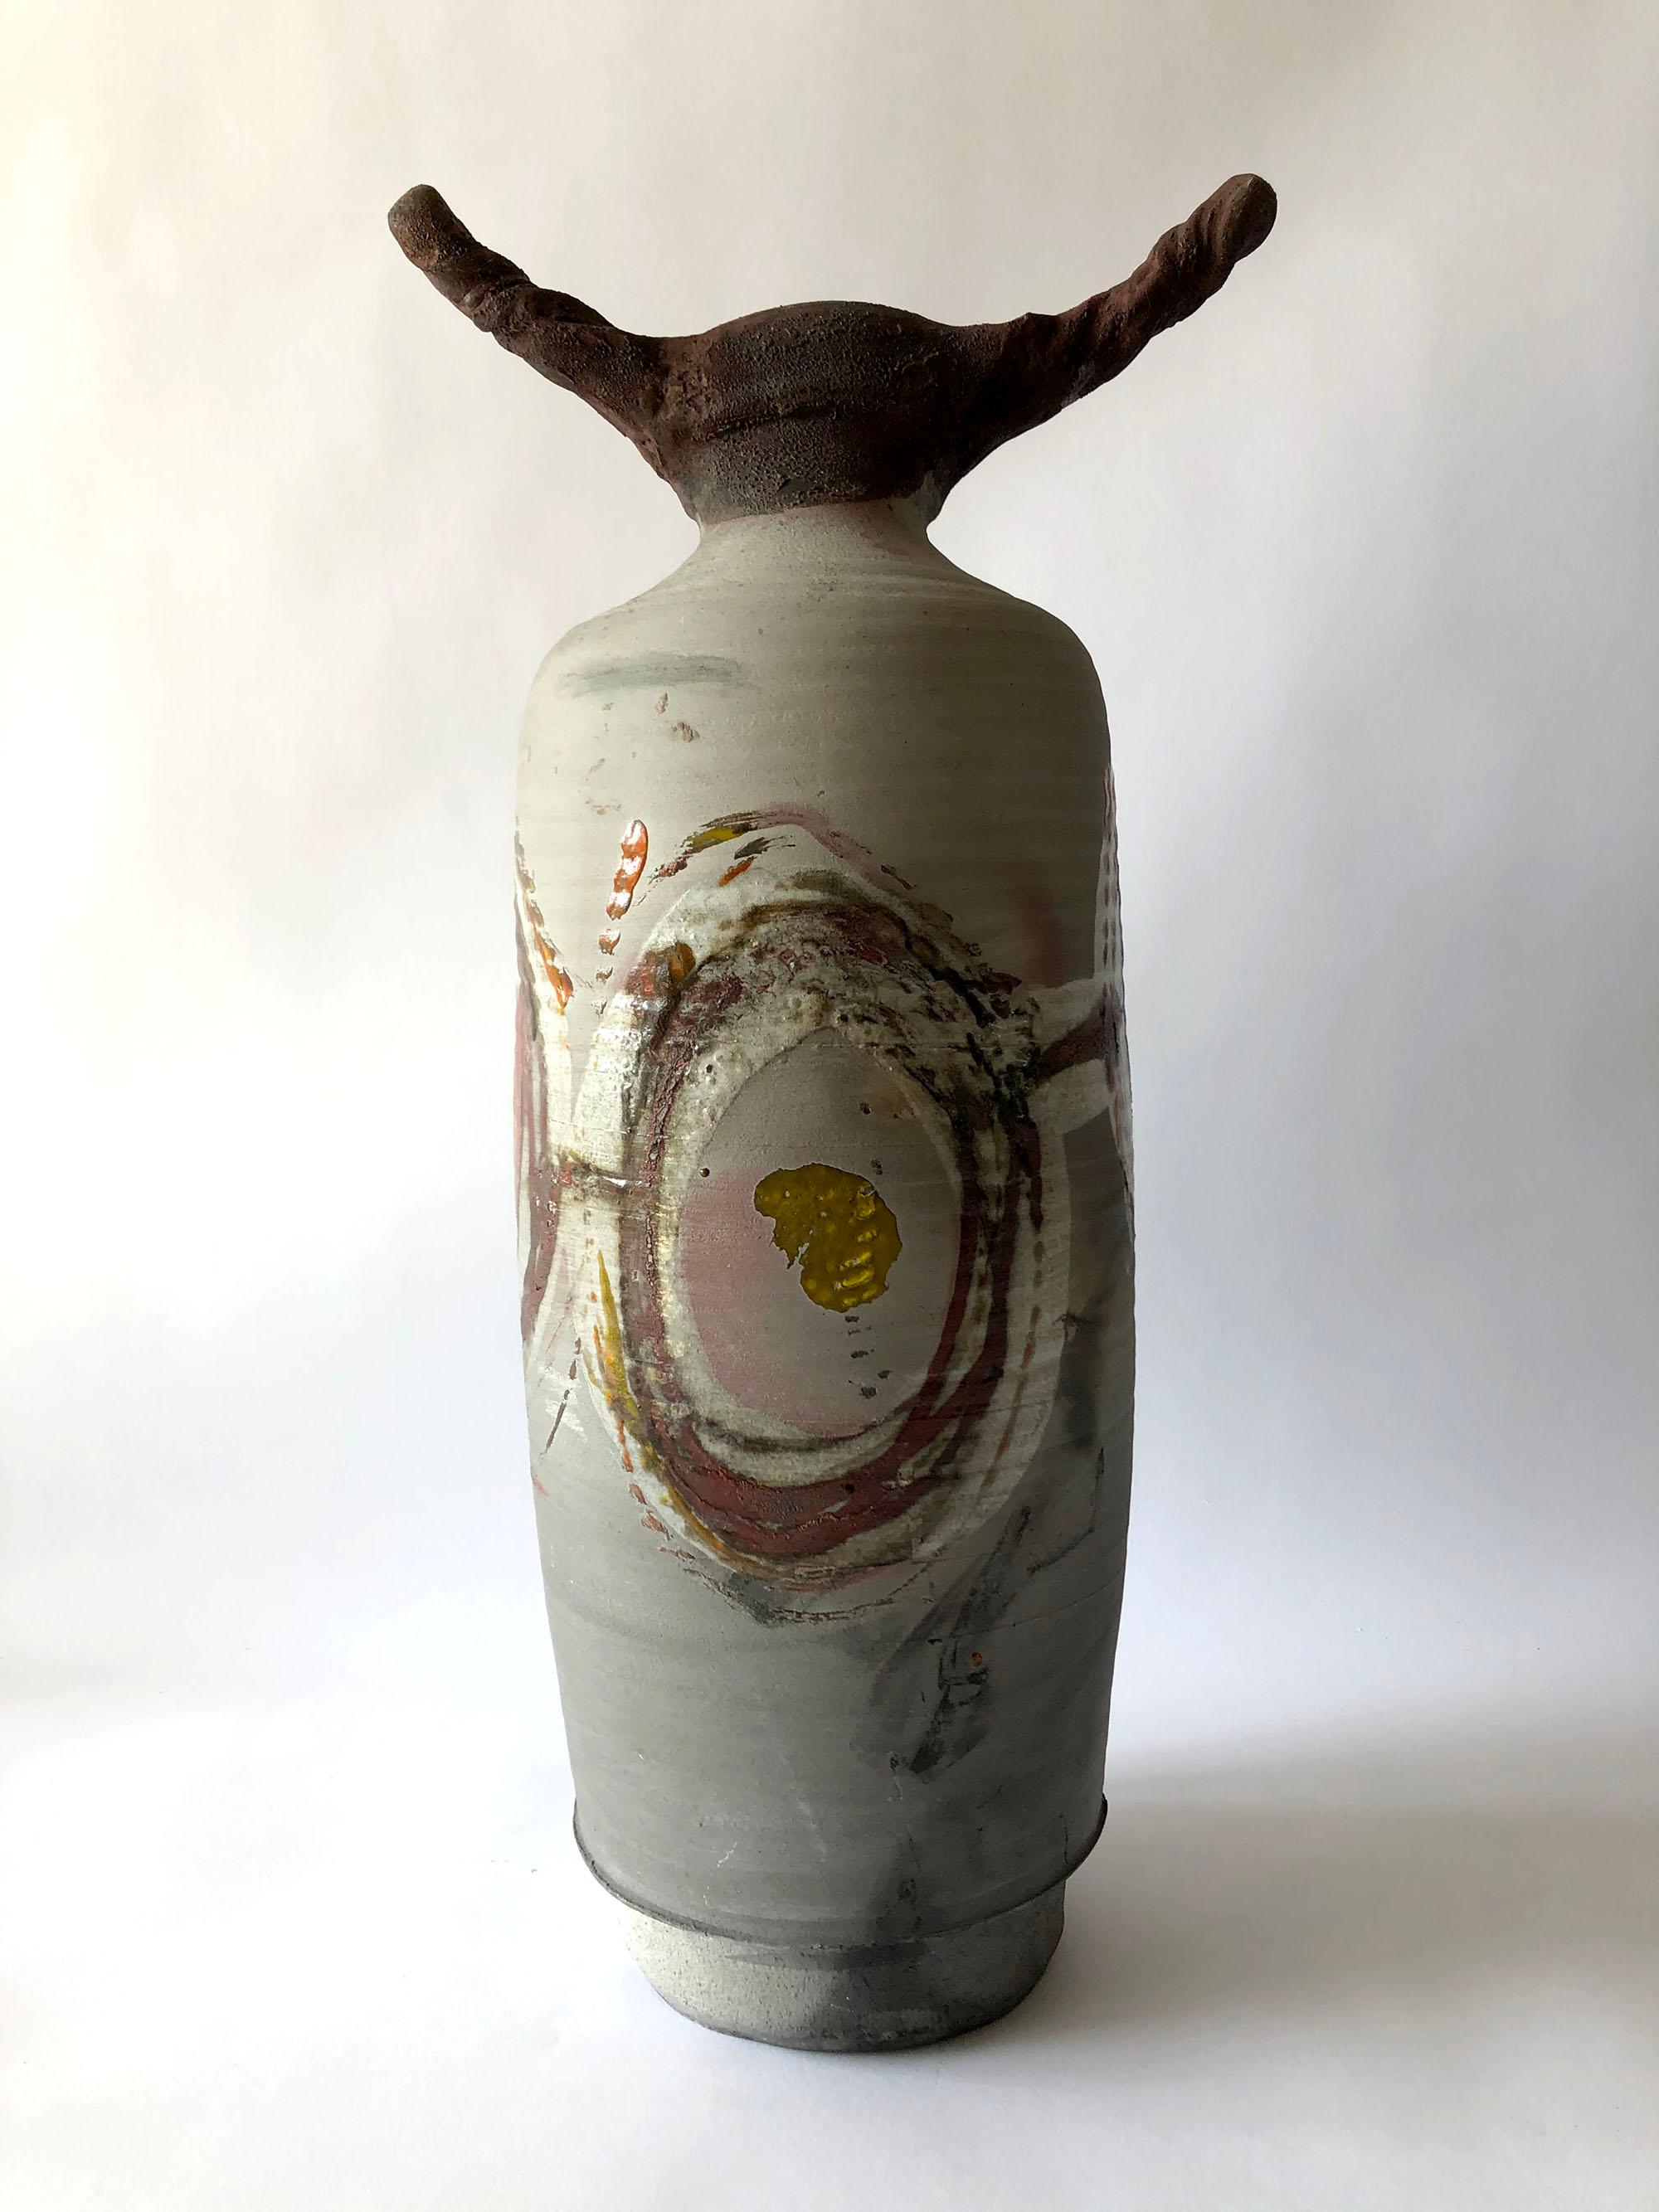 Raku fired earthenware sculptural form signed Perkins, 83, created by Lyle Perkins of Rhode Island. Piece measures 20